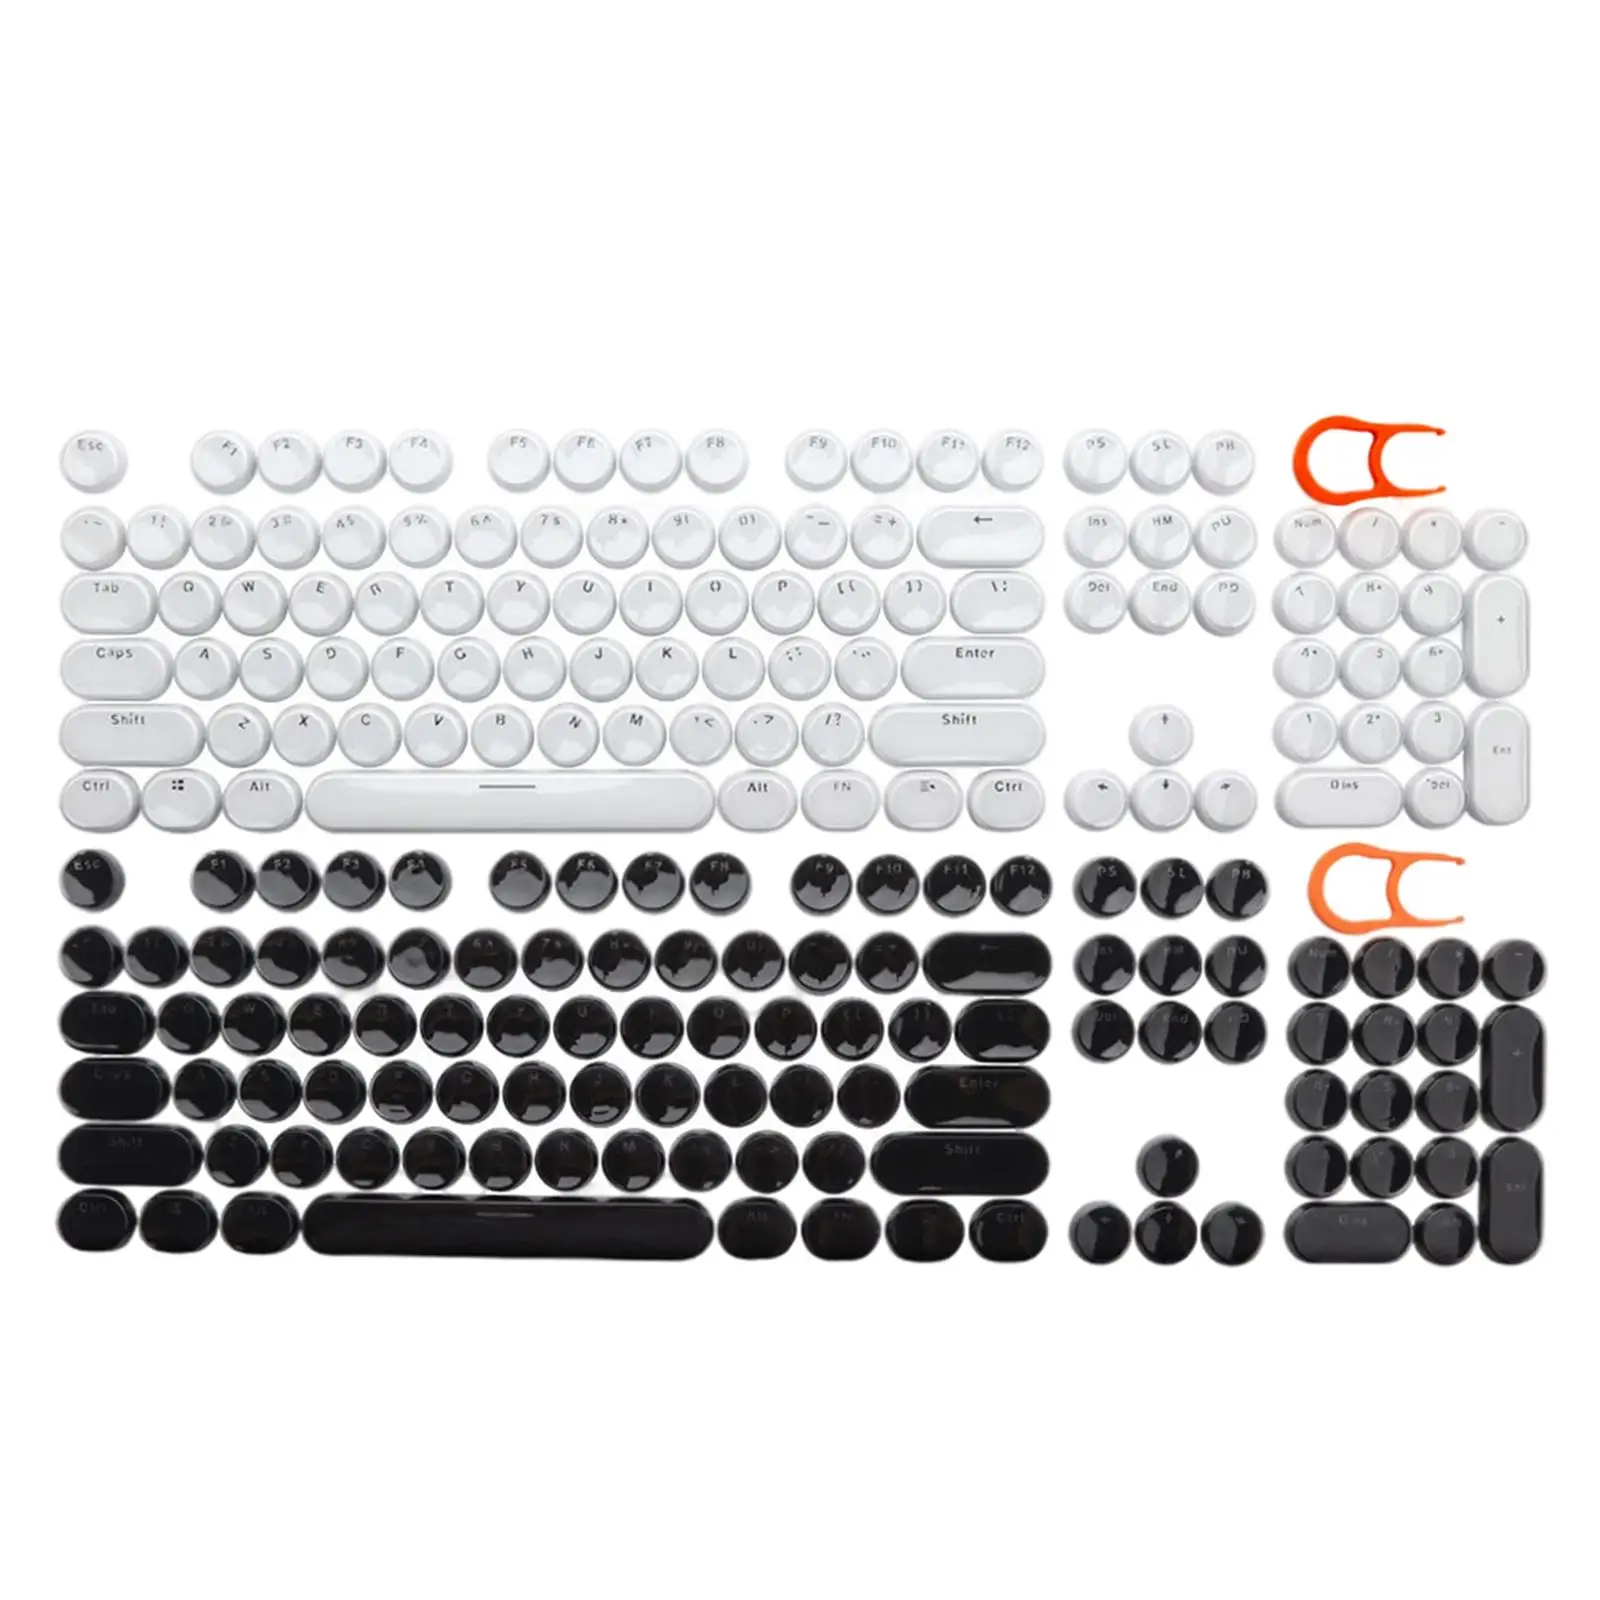 104 Pieces Typewriter Keycaps Round Steampunk Retro Style Gaming Keyboard Keycaps Mechanical Keycaps Keycaps for Computer Office